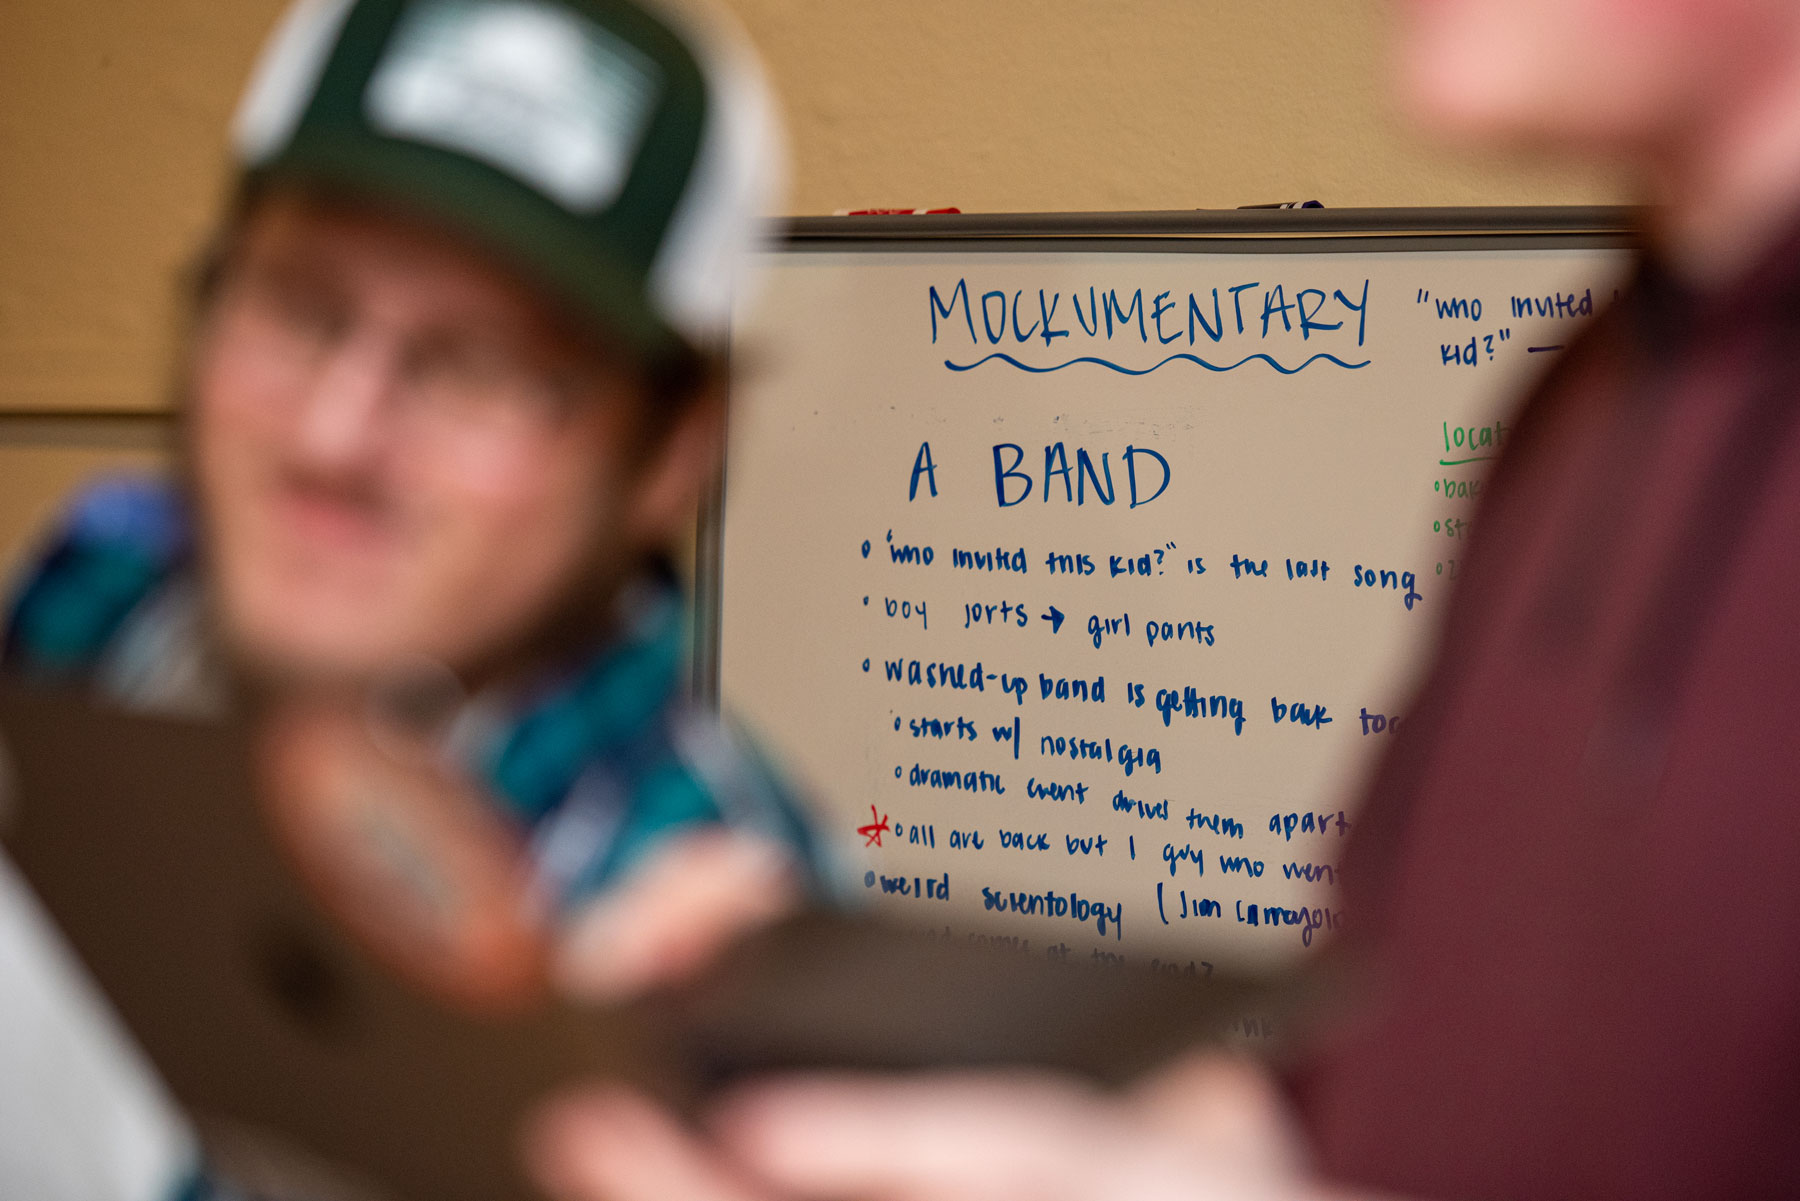 Out of focus faces in front of a focused whiteboard during a planning session